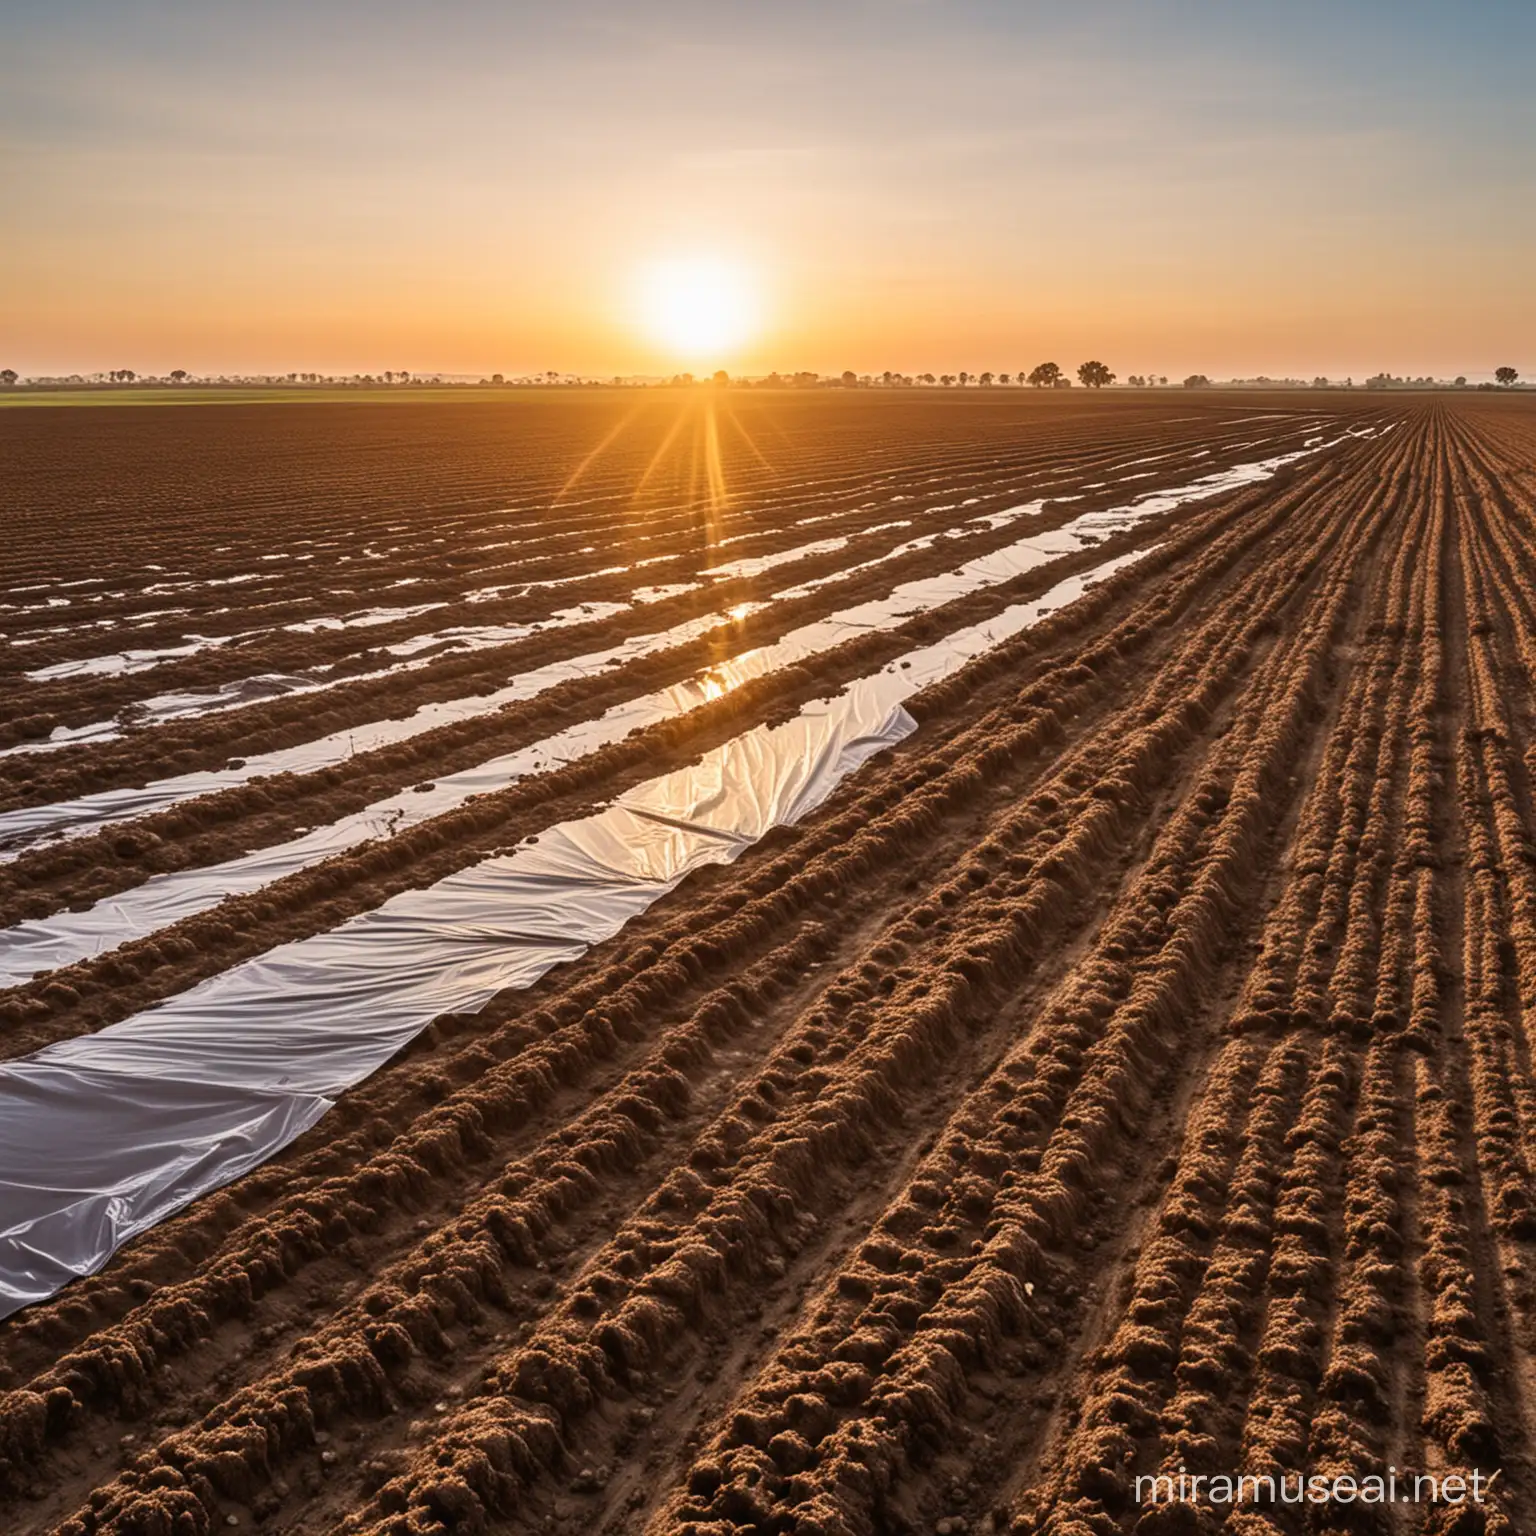 large agricultural field at sunset with plastic film protecting the soil being examined by a farmer and a scientist